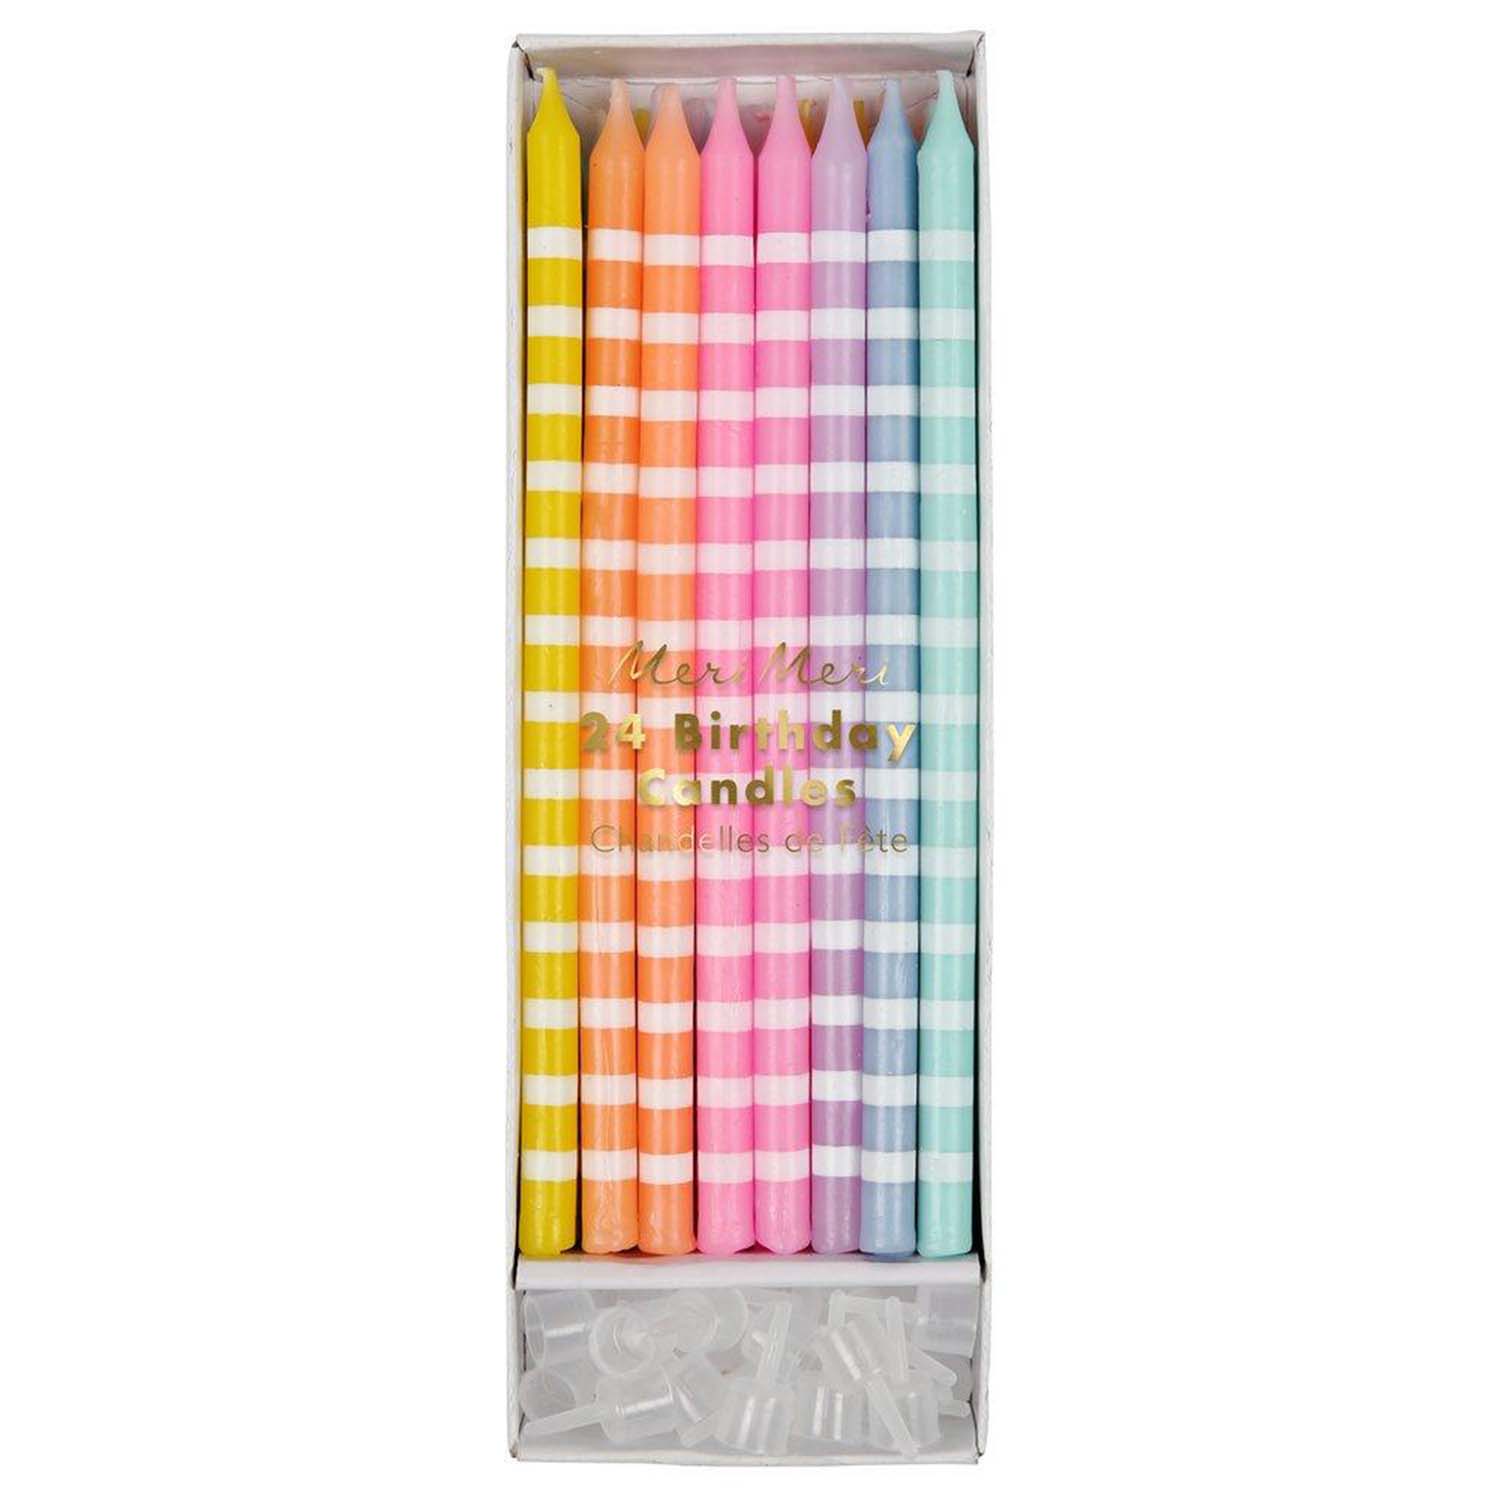 Pastel Stripe Tall Party Candles